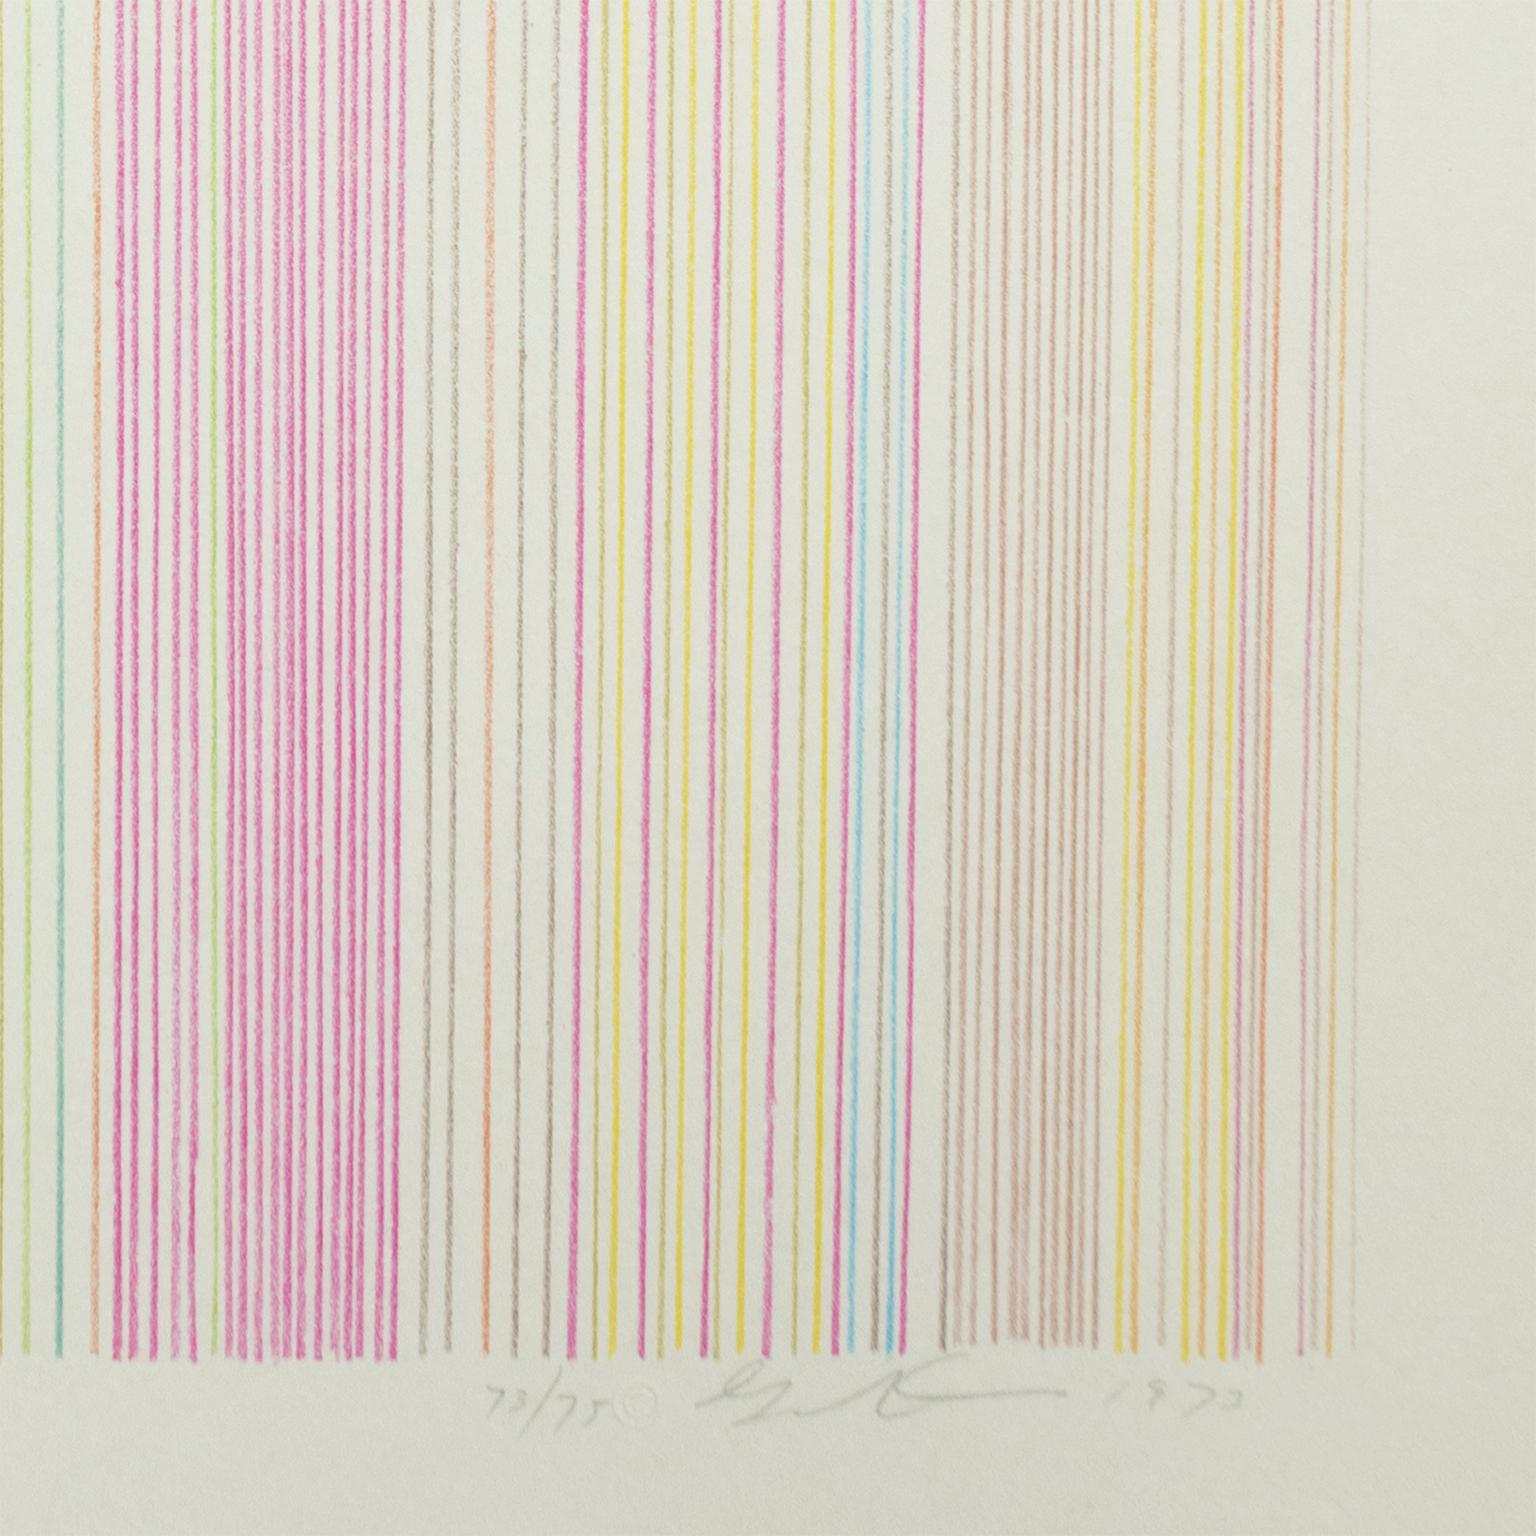 Witch Doctor: abstract modern minimalist color field drawing with rainbow colors - Beige Abstract Print by Gene Davis